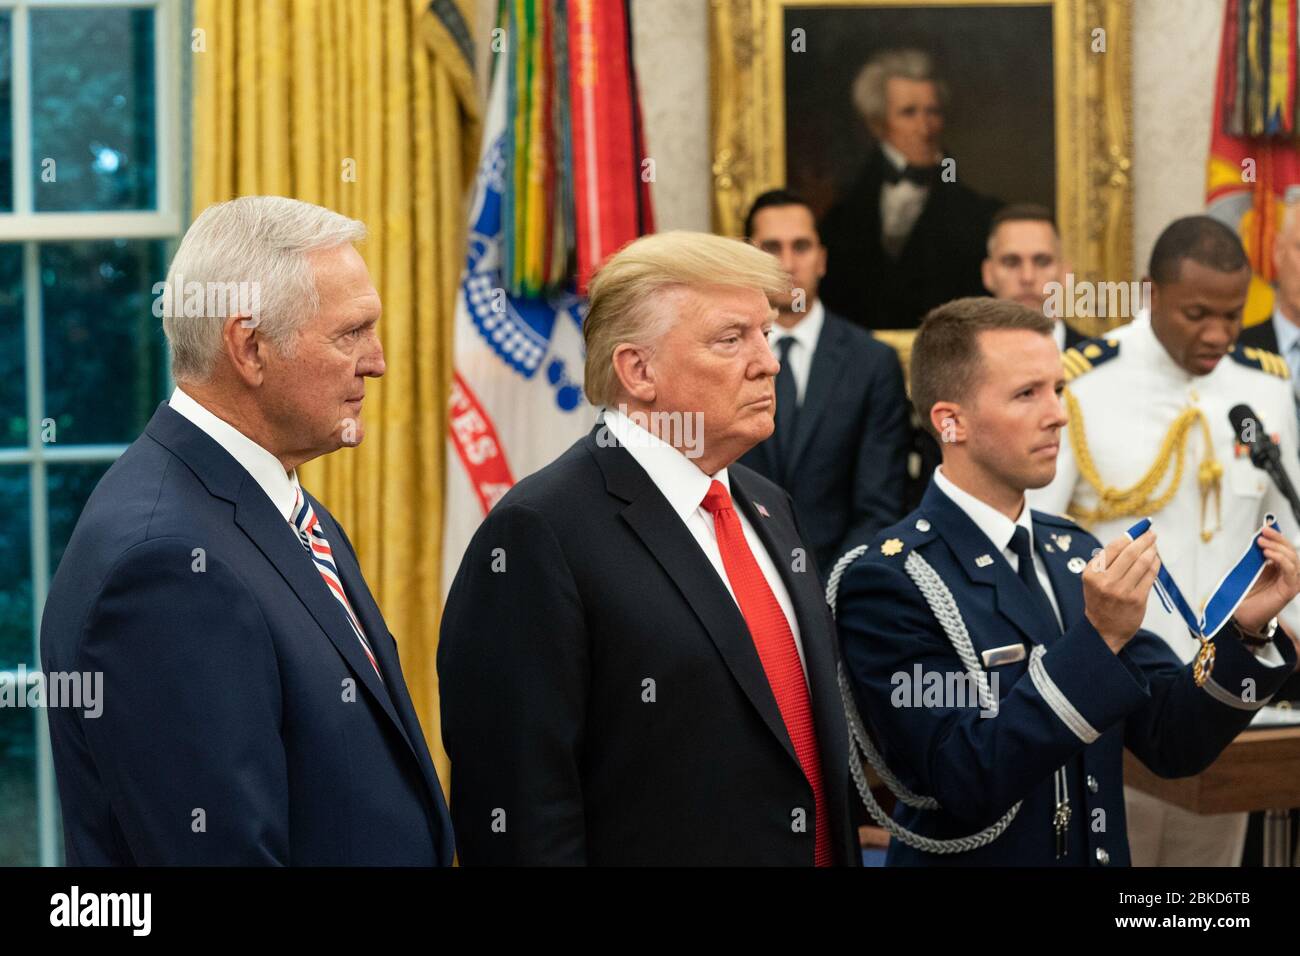 President Donald J. Trump presents the Presidential Medal of Freedom, the nation’s highest civilian honor, to Hall of Fame Los Angeles Lakers basketball star and legendary NBA General Manager Jerry West Thursday, Sept. 5, 2019, in the Oval Office of the White House. President Trump Presents the Medal of Freedom to Jerry West Stock Photo